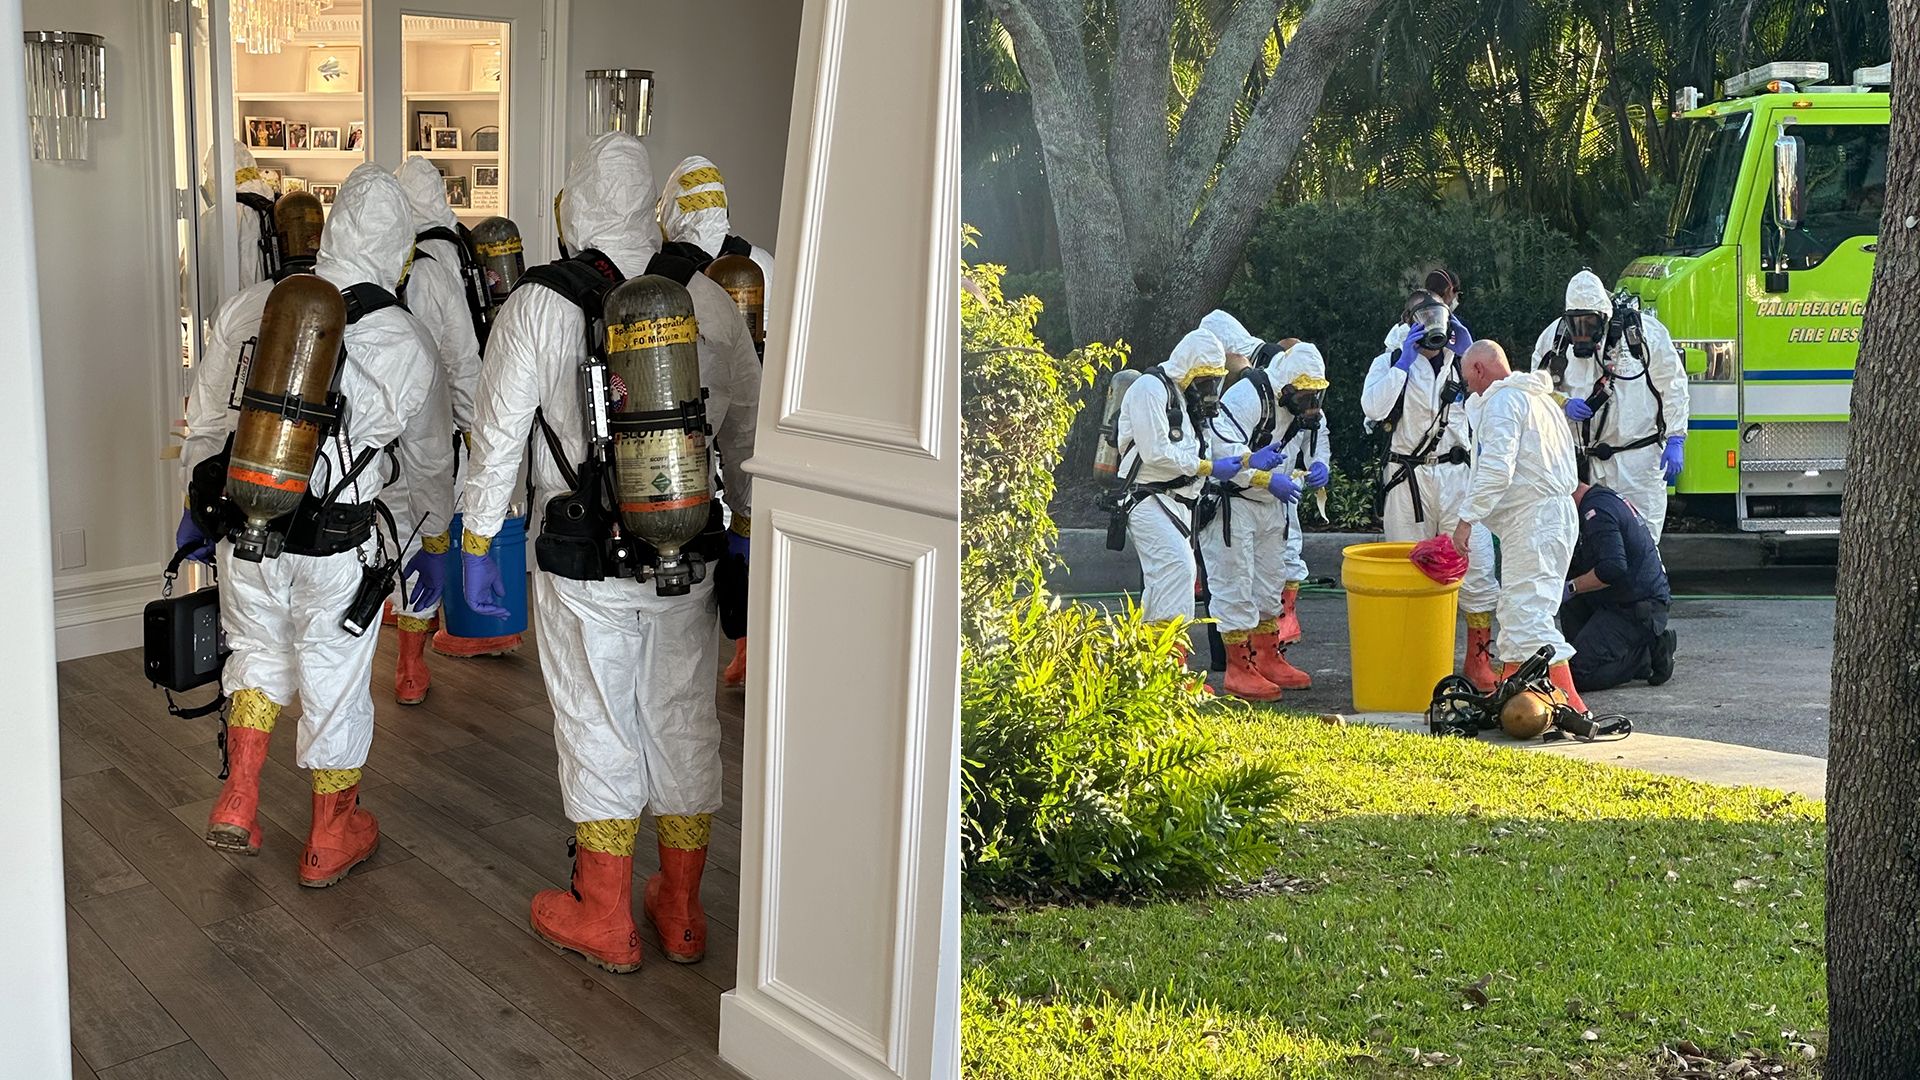 People in hazmat suits stand in a hallway (left), and outside around a yellow trash can (right) as they respond to an incident at the home of Donald Trump Jr. 